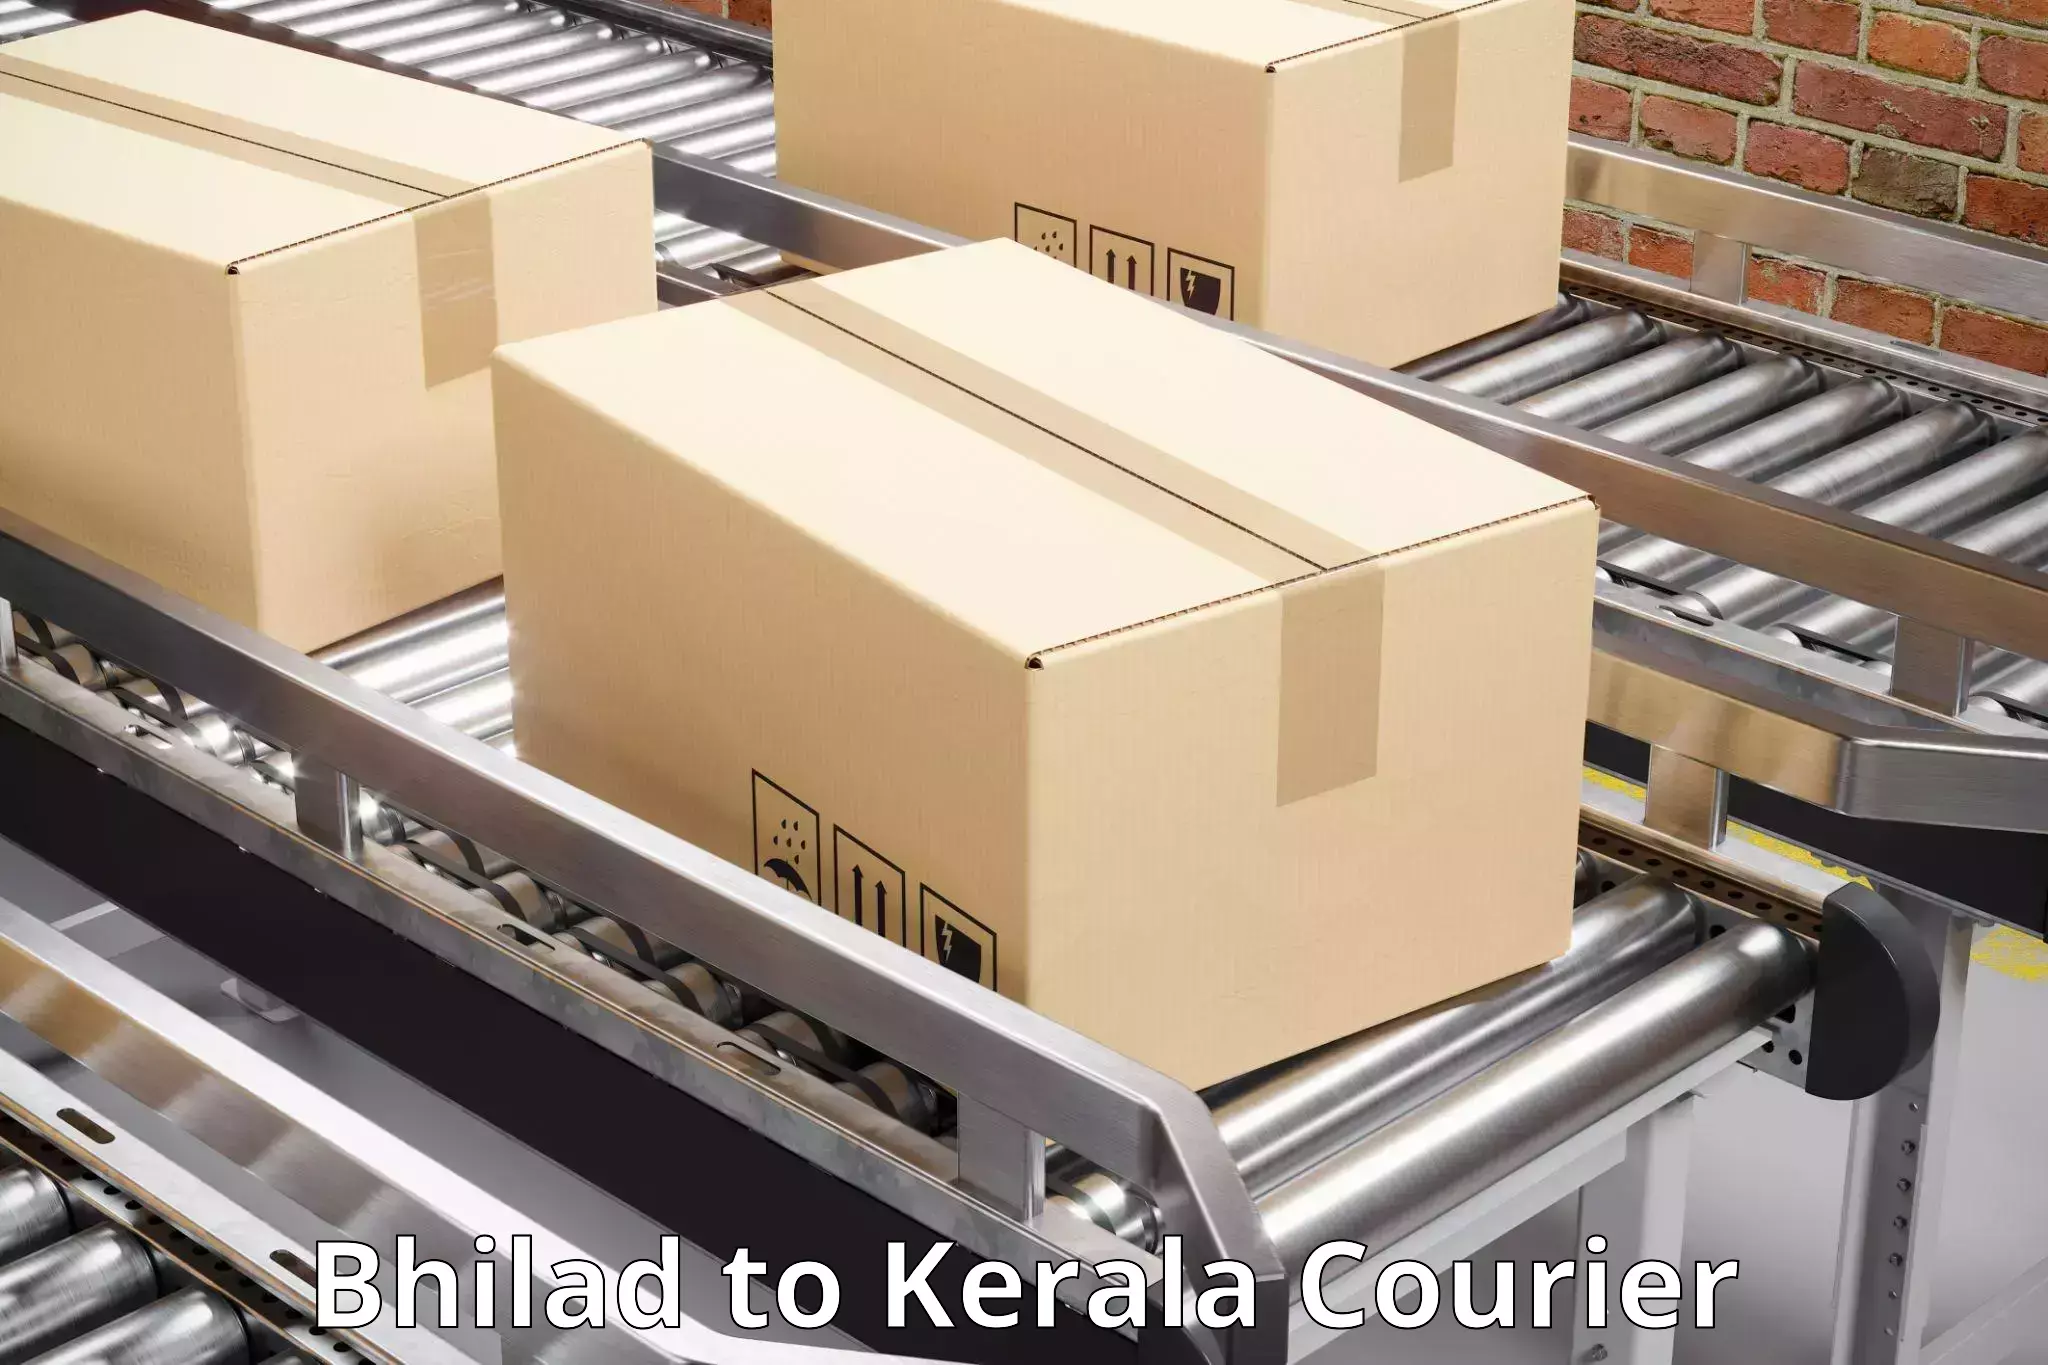 24-hour delivery options Bhilad to Kadanad